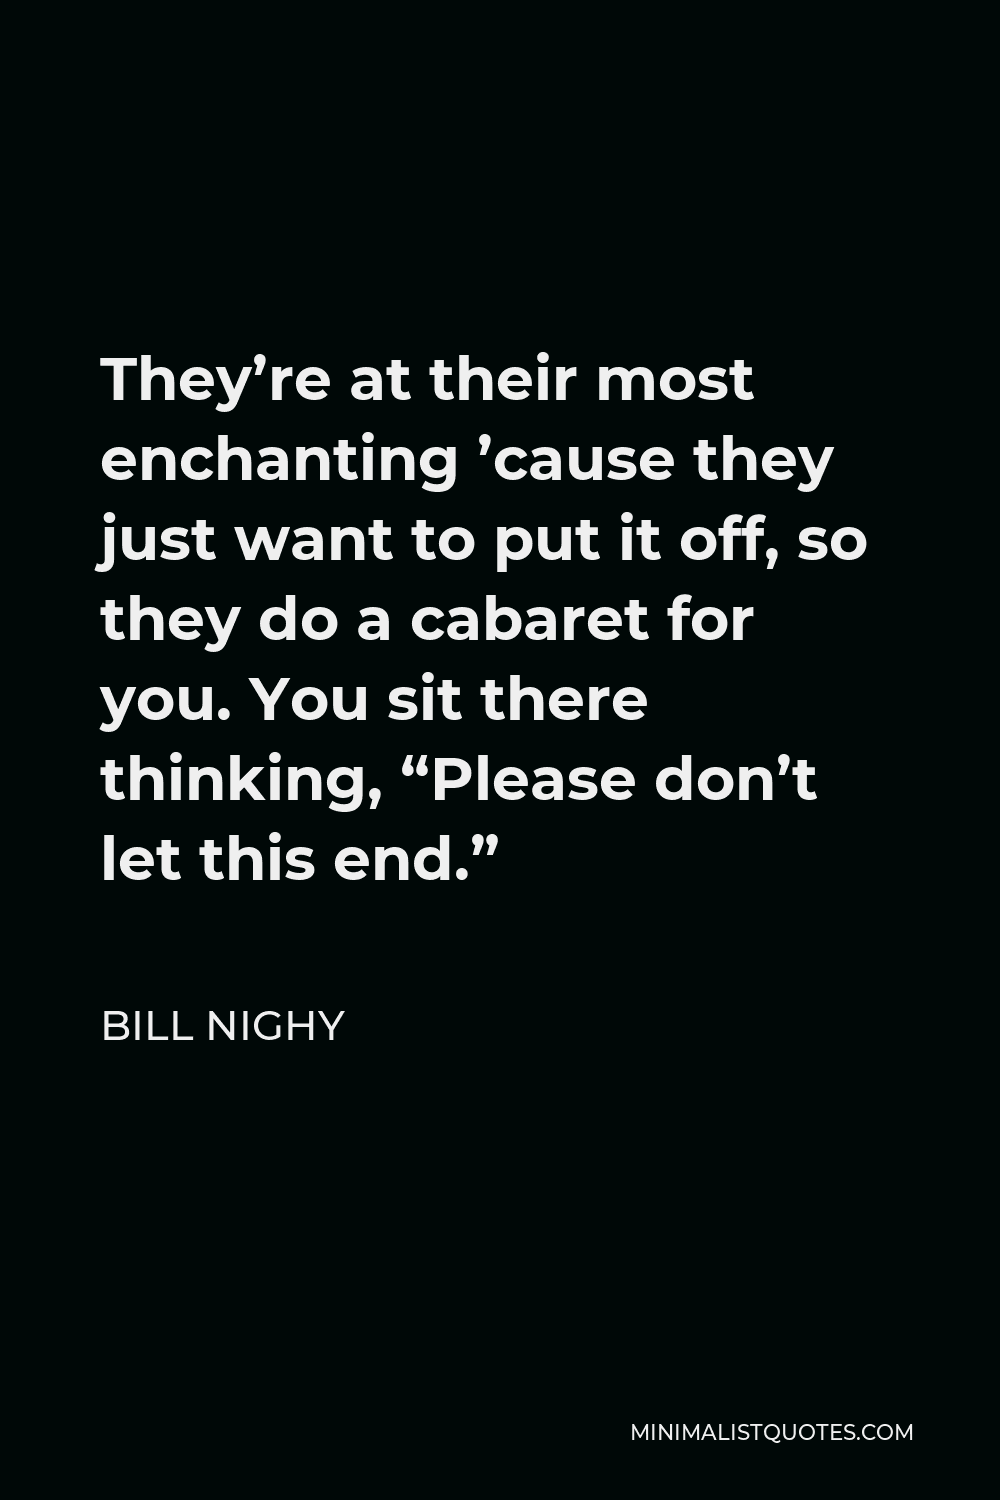 Bill Nighy Quote - They’re at their most enchanting ’cause they just want to put it off, so they do a cabaret for you. You sit there thinking, “Please don’t let this end.”